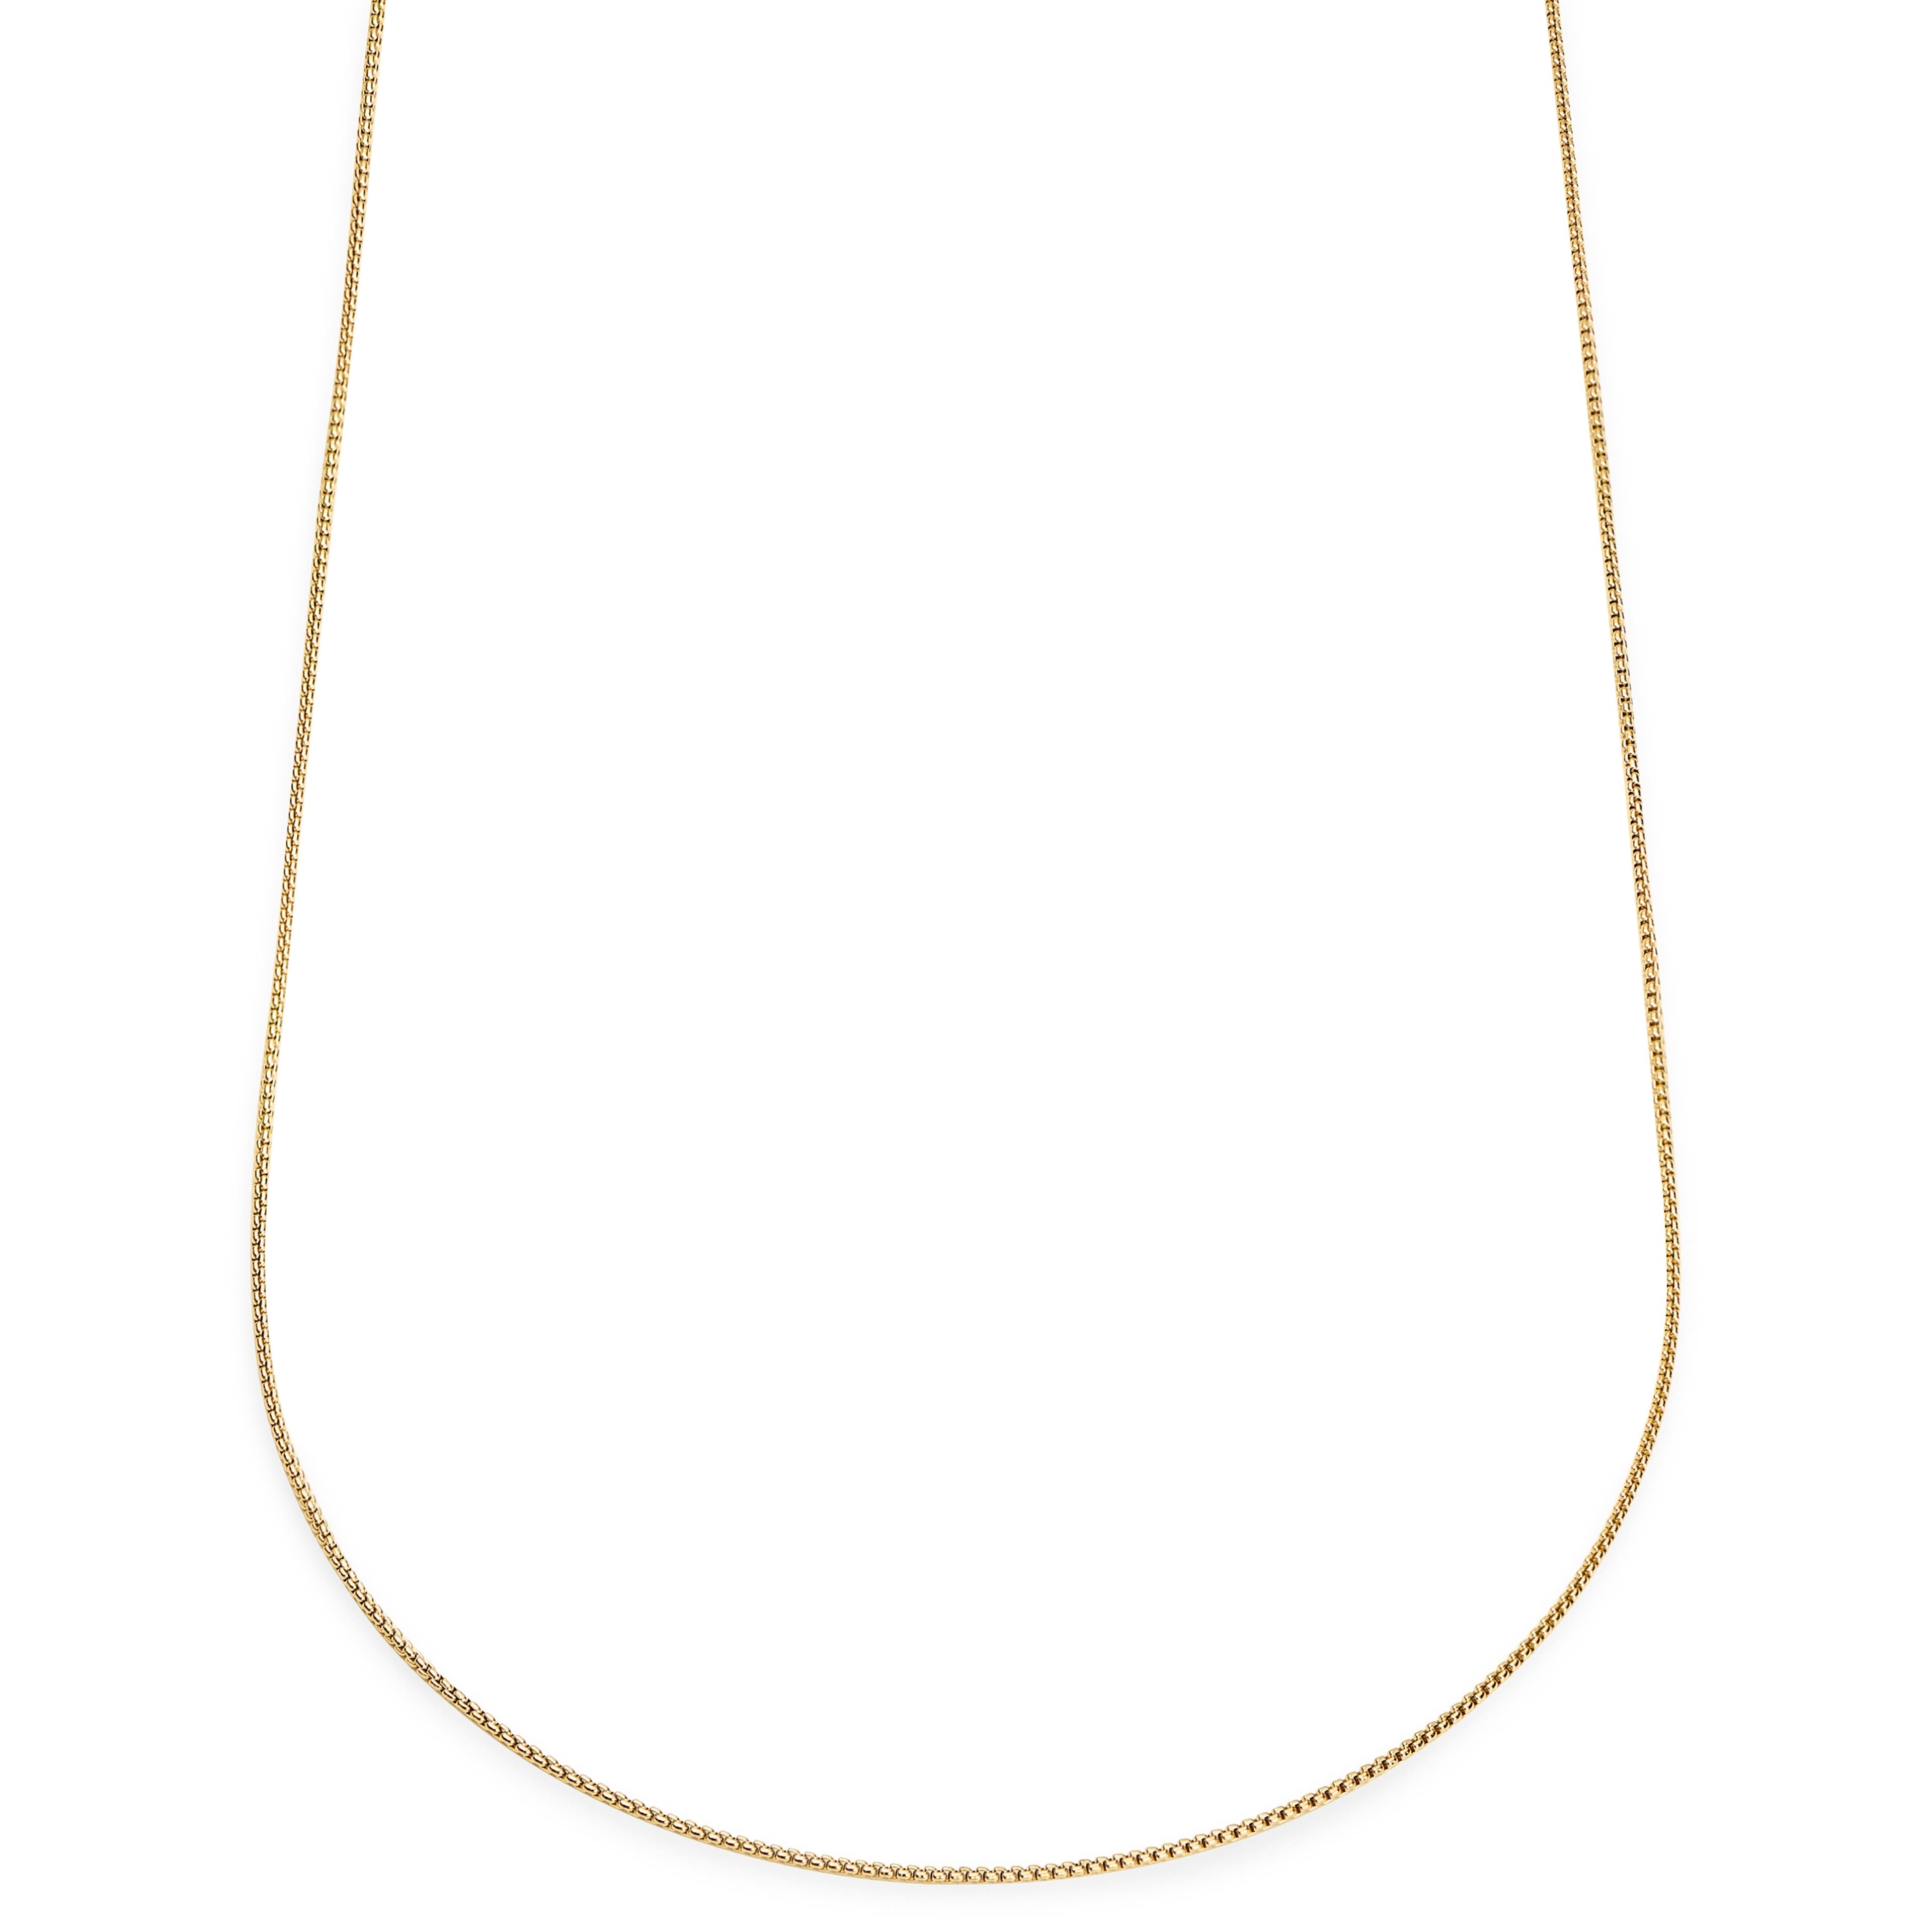 Essentials | 1 mm Gold-Tone Curved Box Chain Necklace